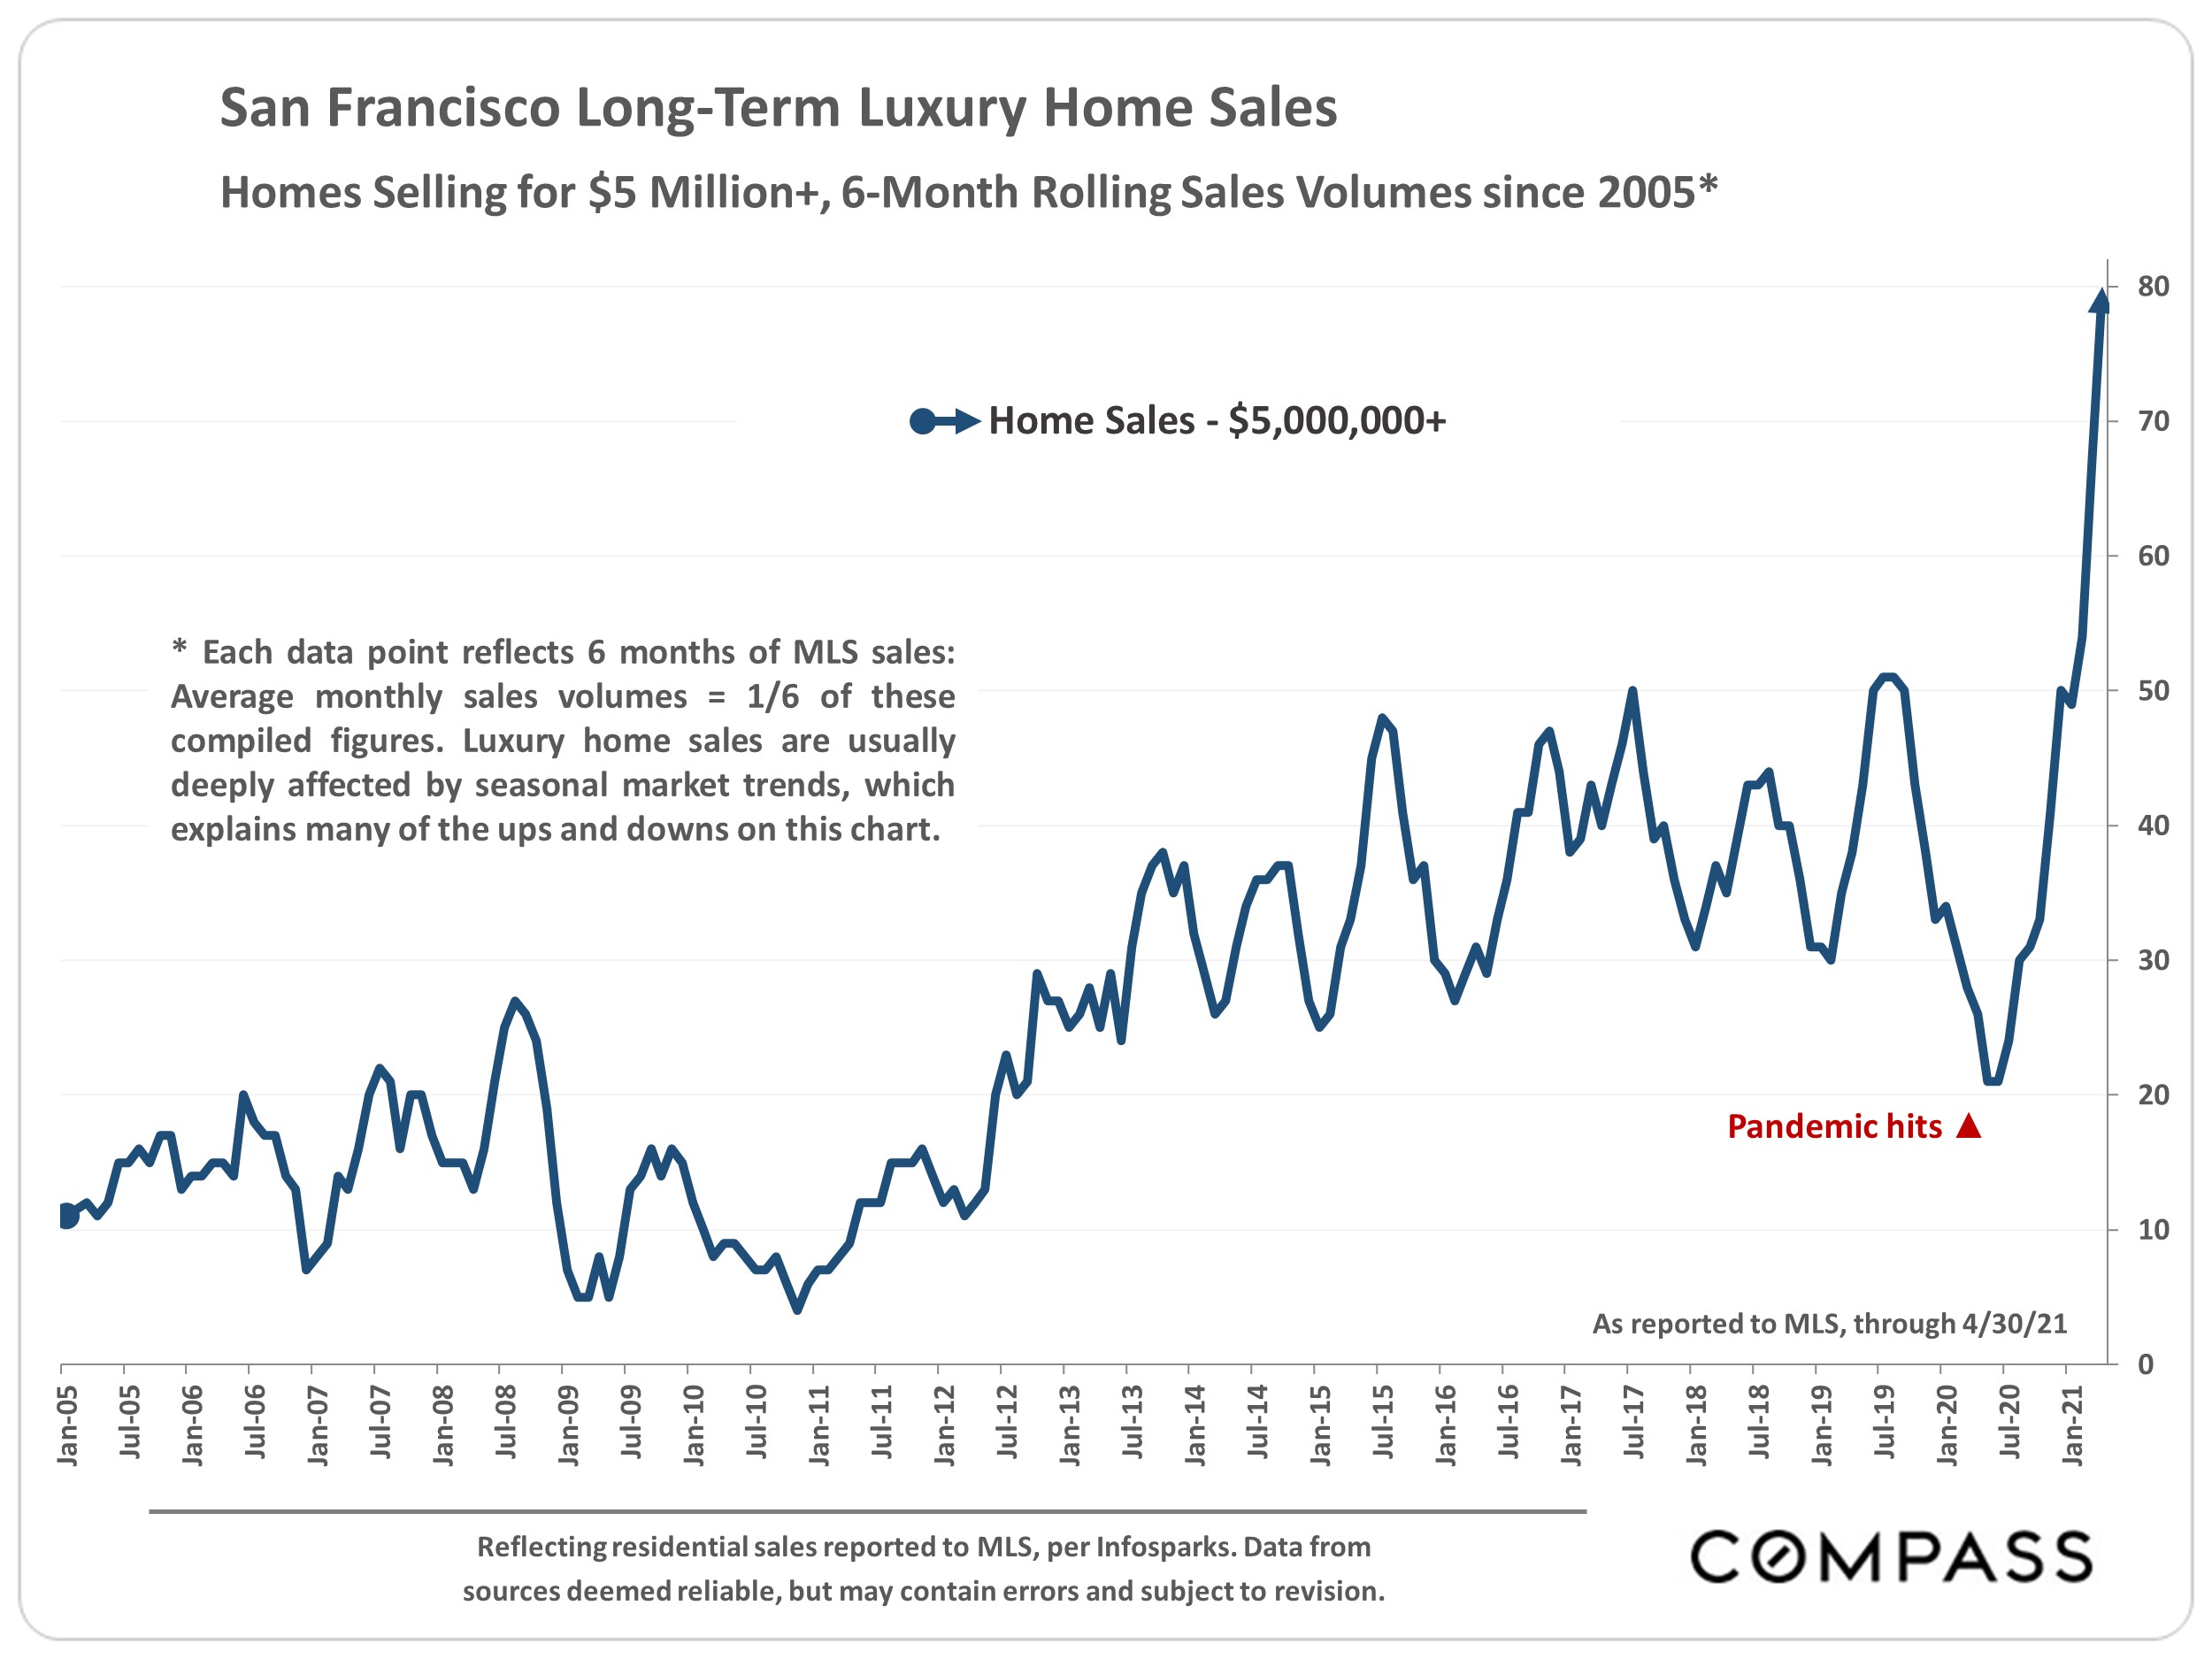 Chart showing the San Francisco Long-Term Luxury Home Sales, Homes Selling for $5 Million+, 6-Month Rolling Sales Volumes since 2005